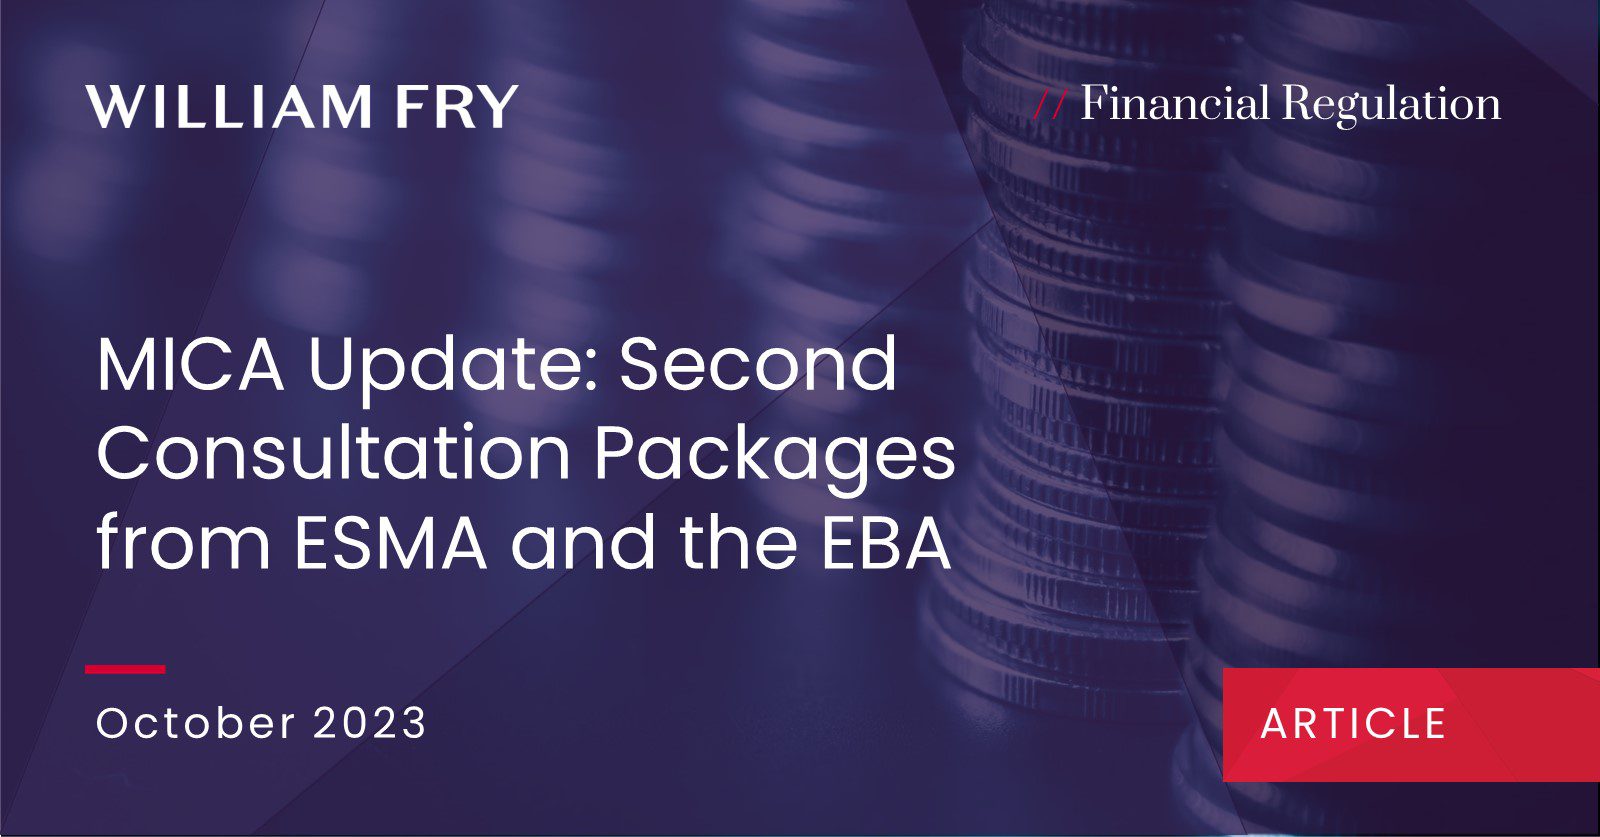 MICA Update: Second Consultation Packages from ESMA and the EBA